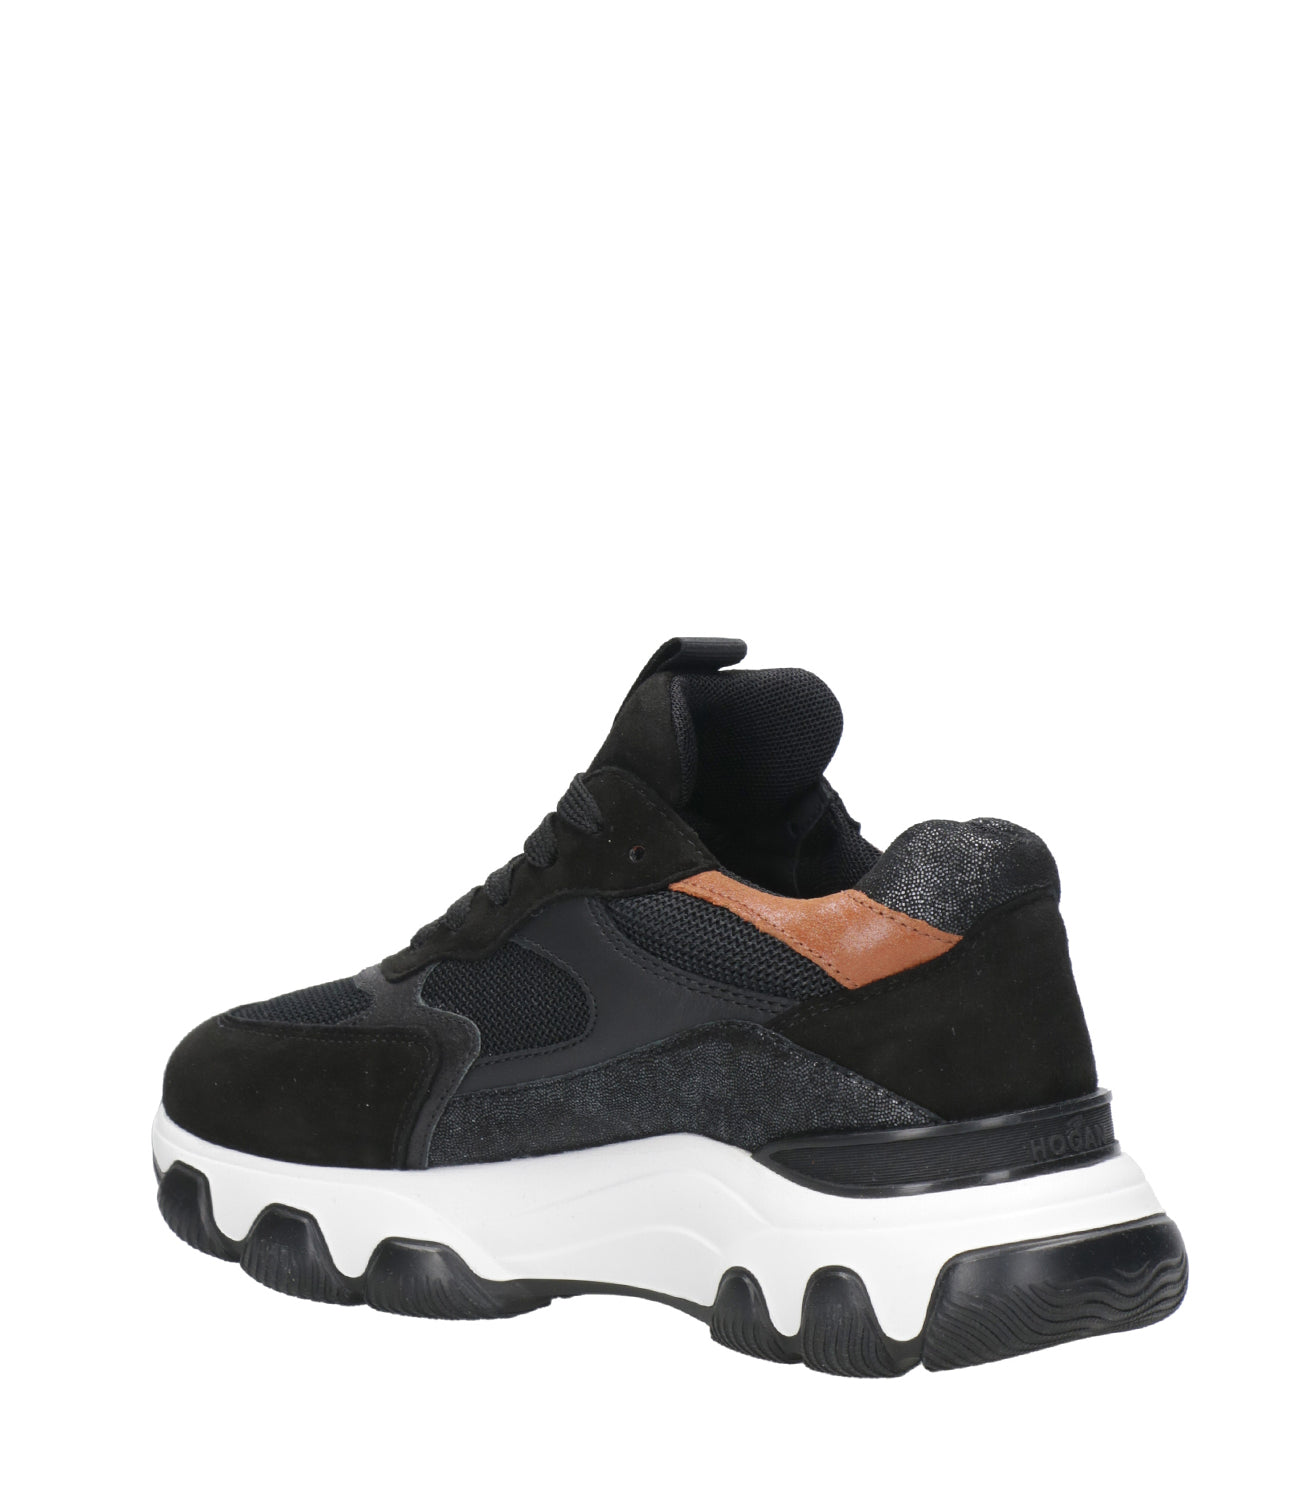 Hogan | Sneakers Hyperactive Lace-up Black and Leather